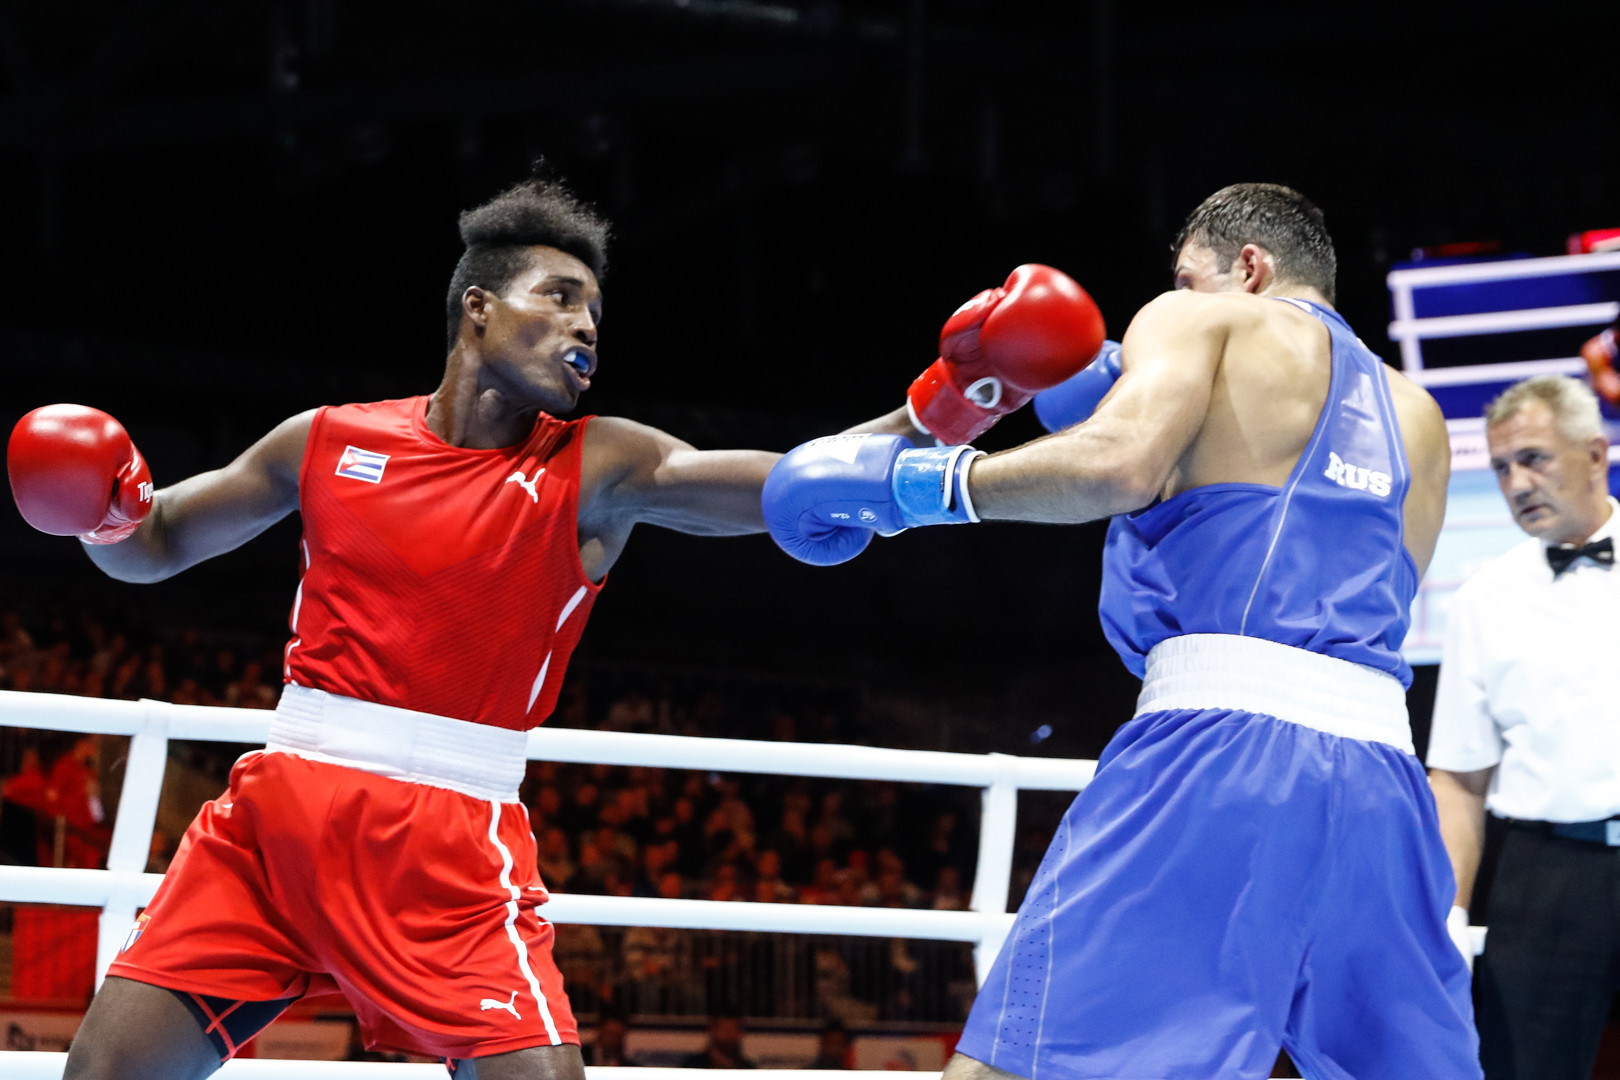 Cuba's Julio La Cruz continued his campaign for a fifth light heavyweight world title against Russia's Georgii Kushitashvili, the division's eighth seed ©Yekaterinburg 2019